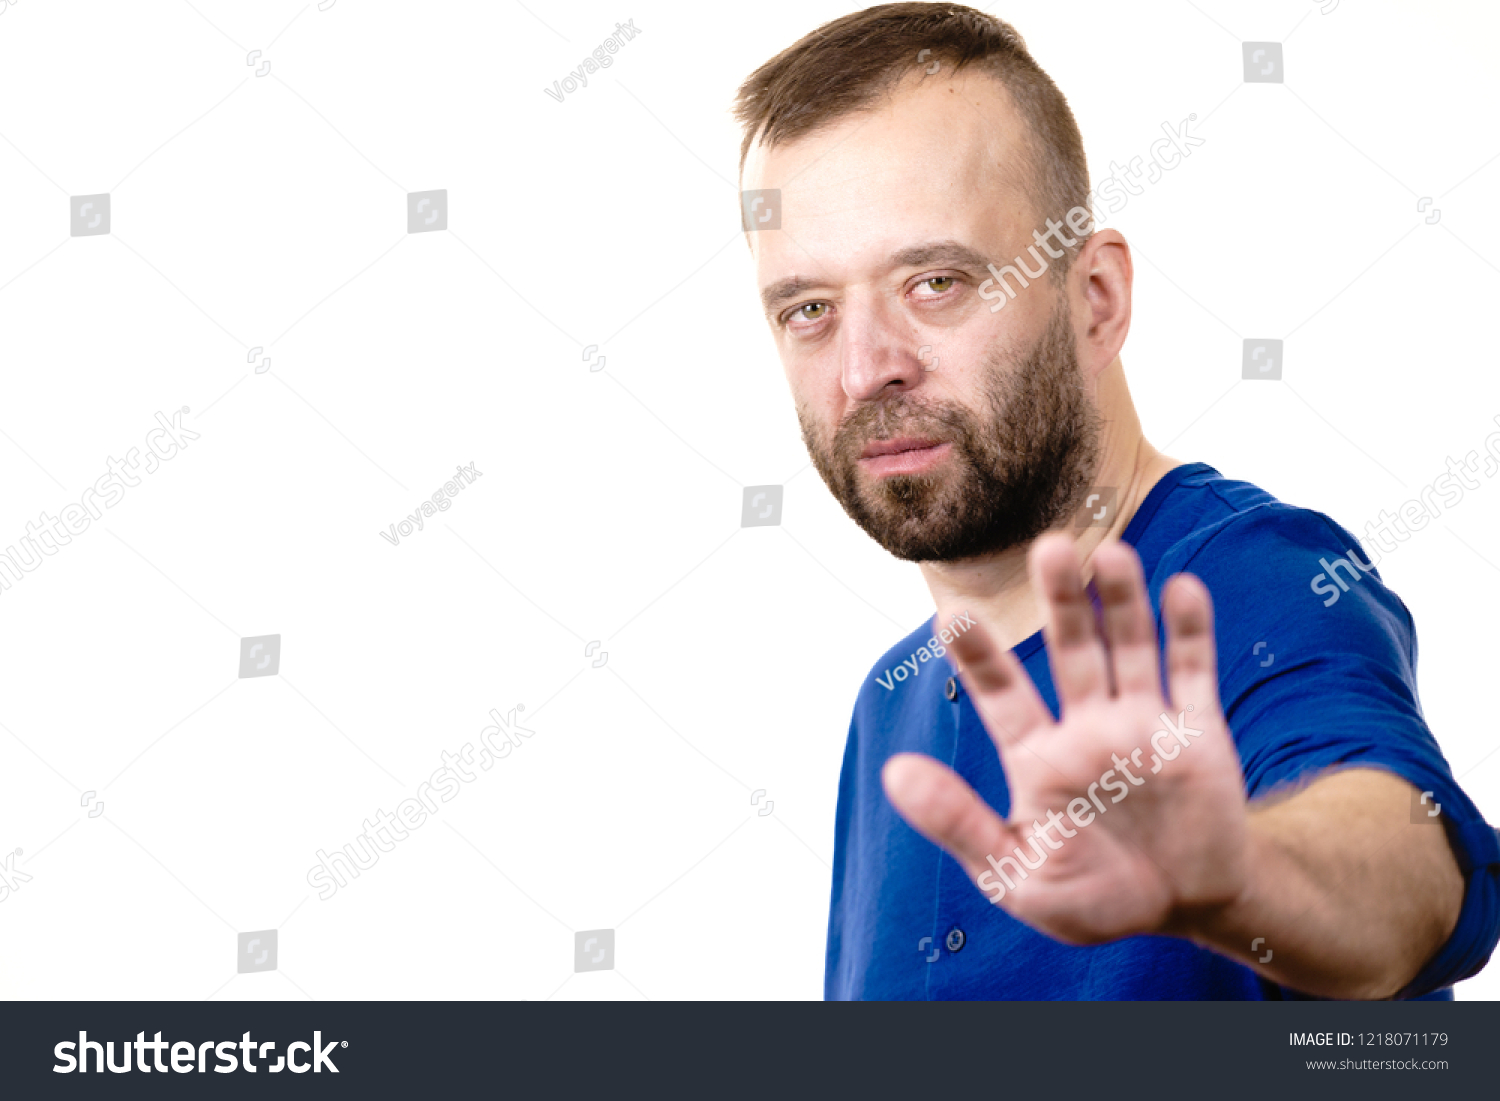 Serious man gesturing with palm hand showing stop refusing gesture. Human gesutres and expressions concept. #1218071179